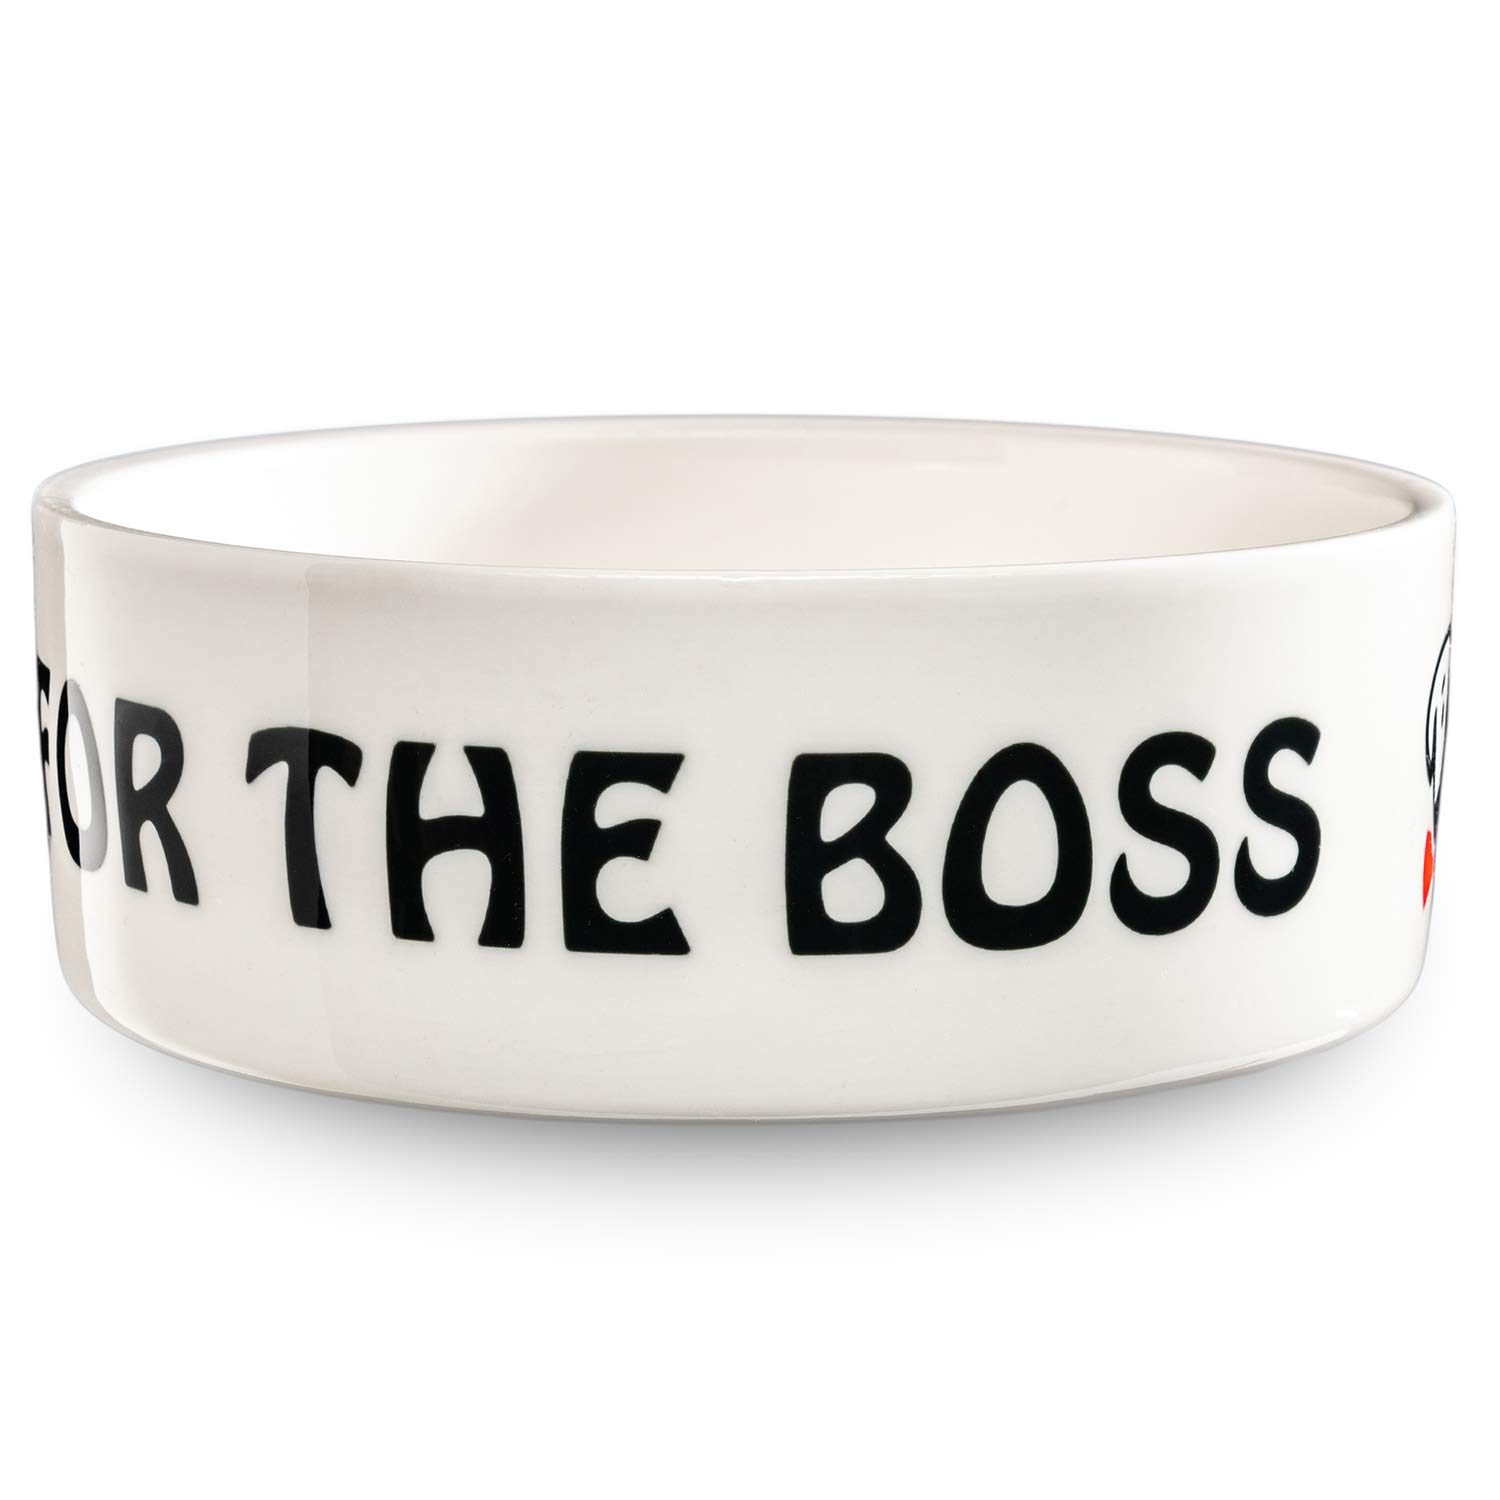 Food for the Boss pet bowl in white by Beau Tyler